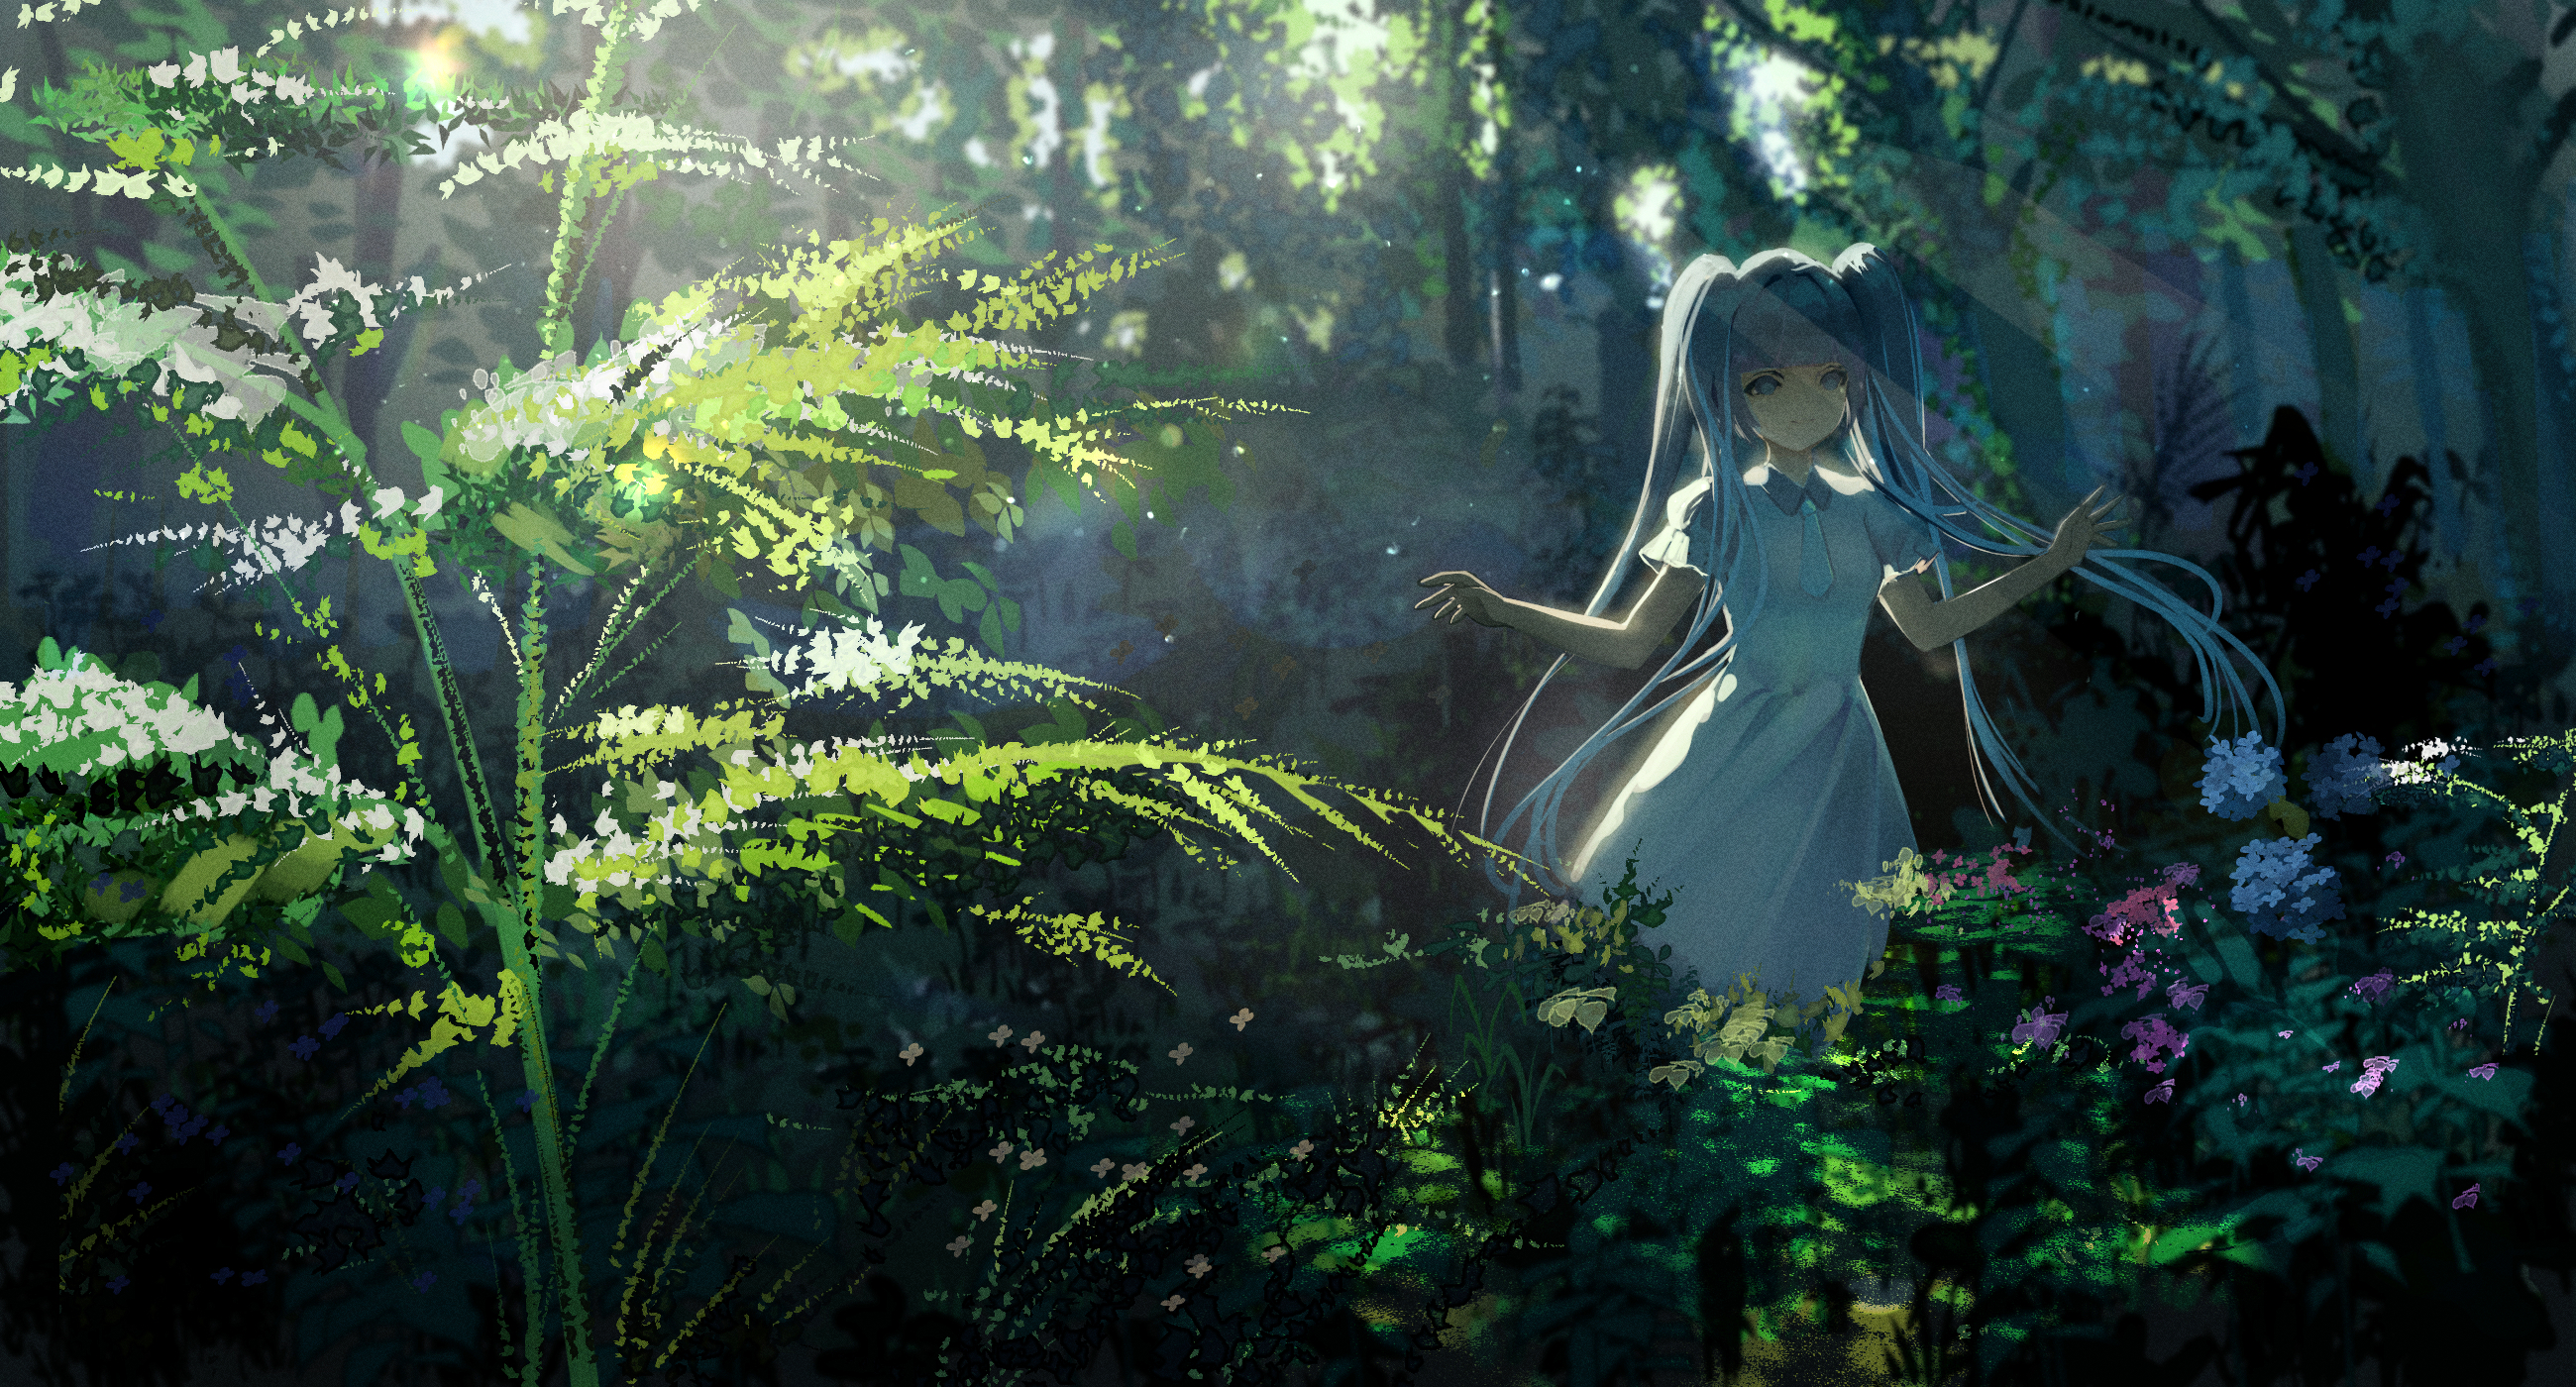 Anime 2600x1400 anime anime girls Hatsune Miku Vocaloid twintails long hair blue hair blue eyes forest sunlight flowers leaves standing dress smiling tie